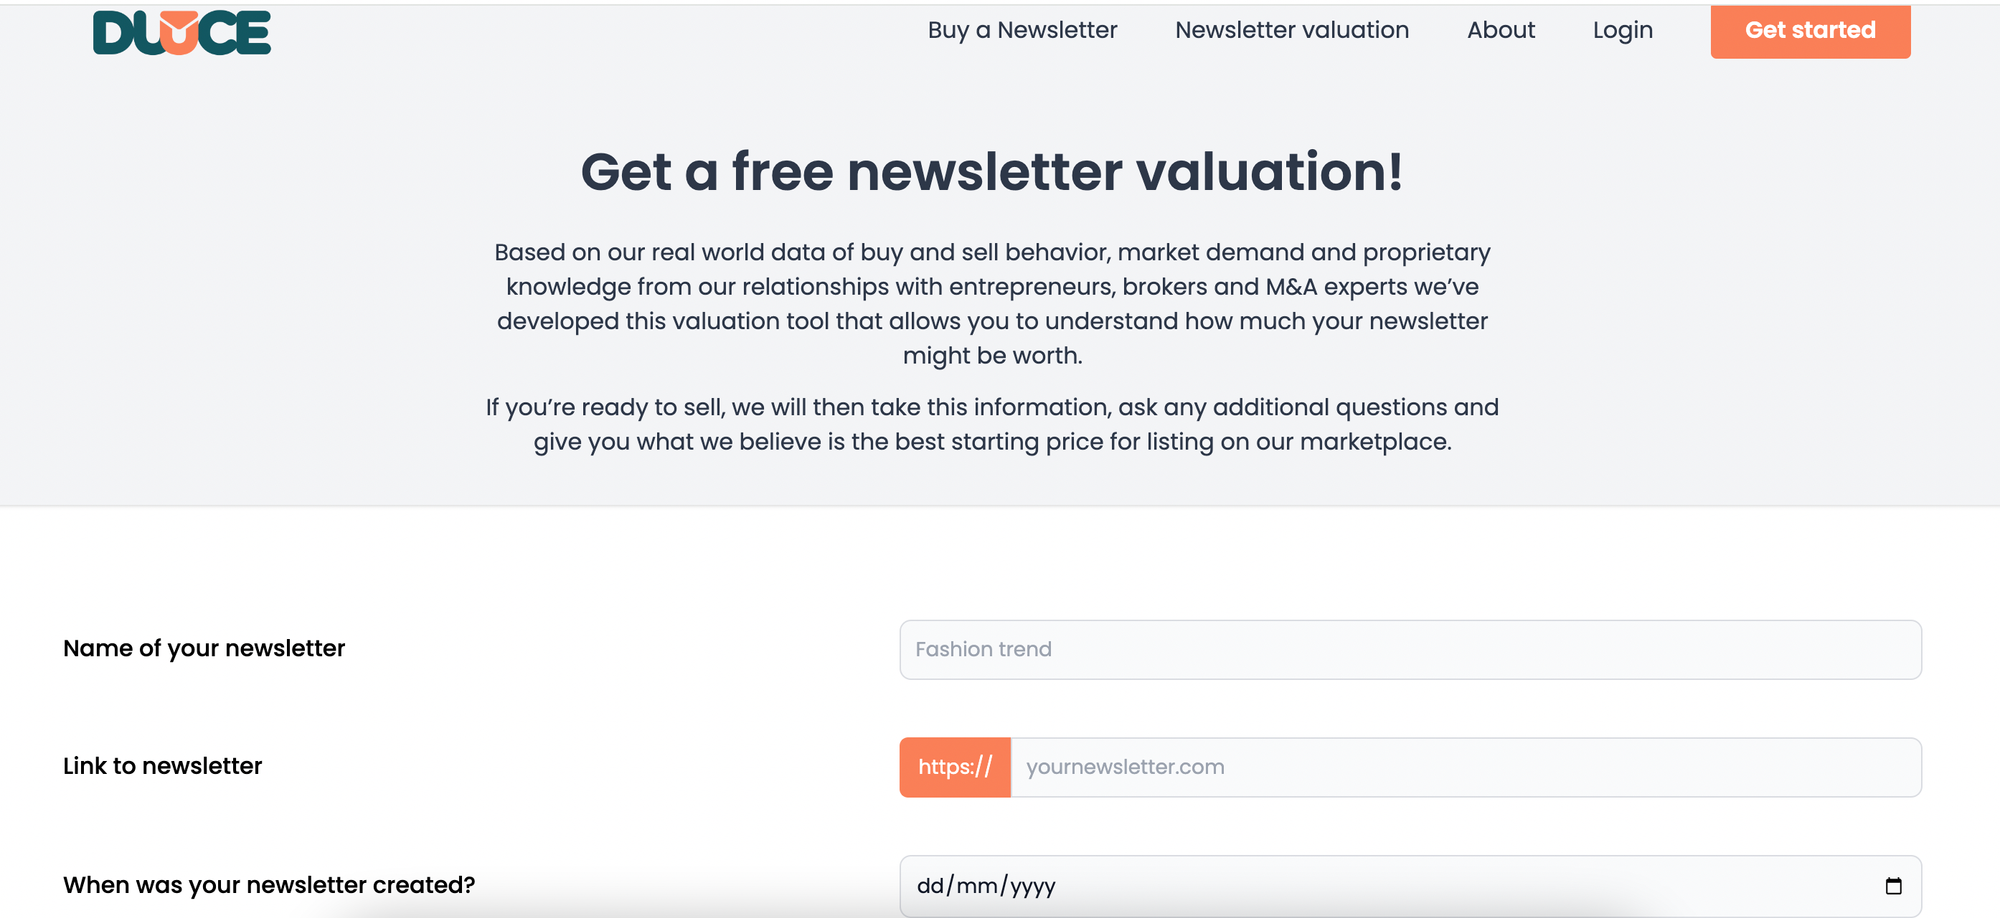 Duuce newsletter valuation tool